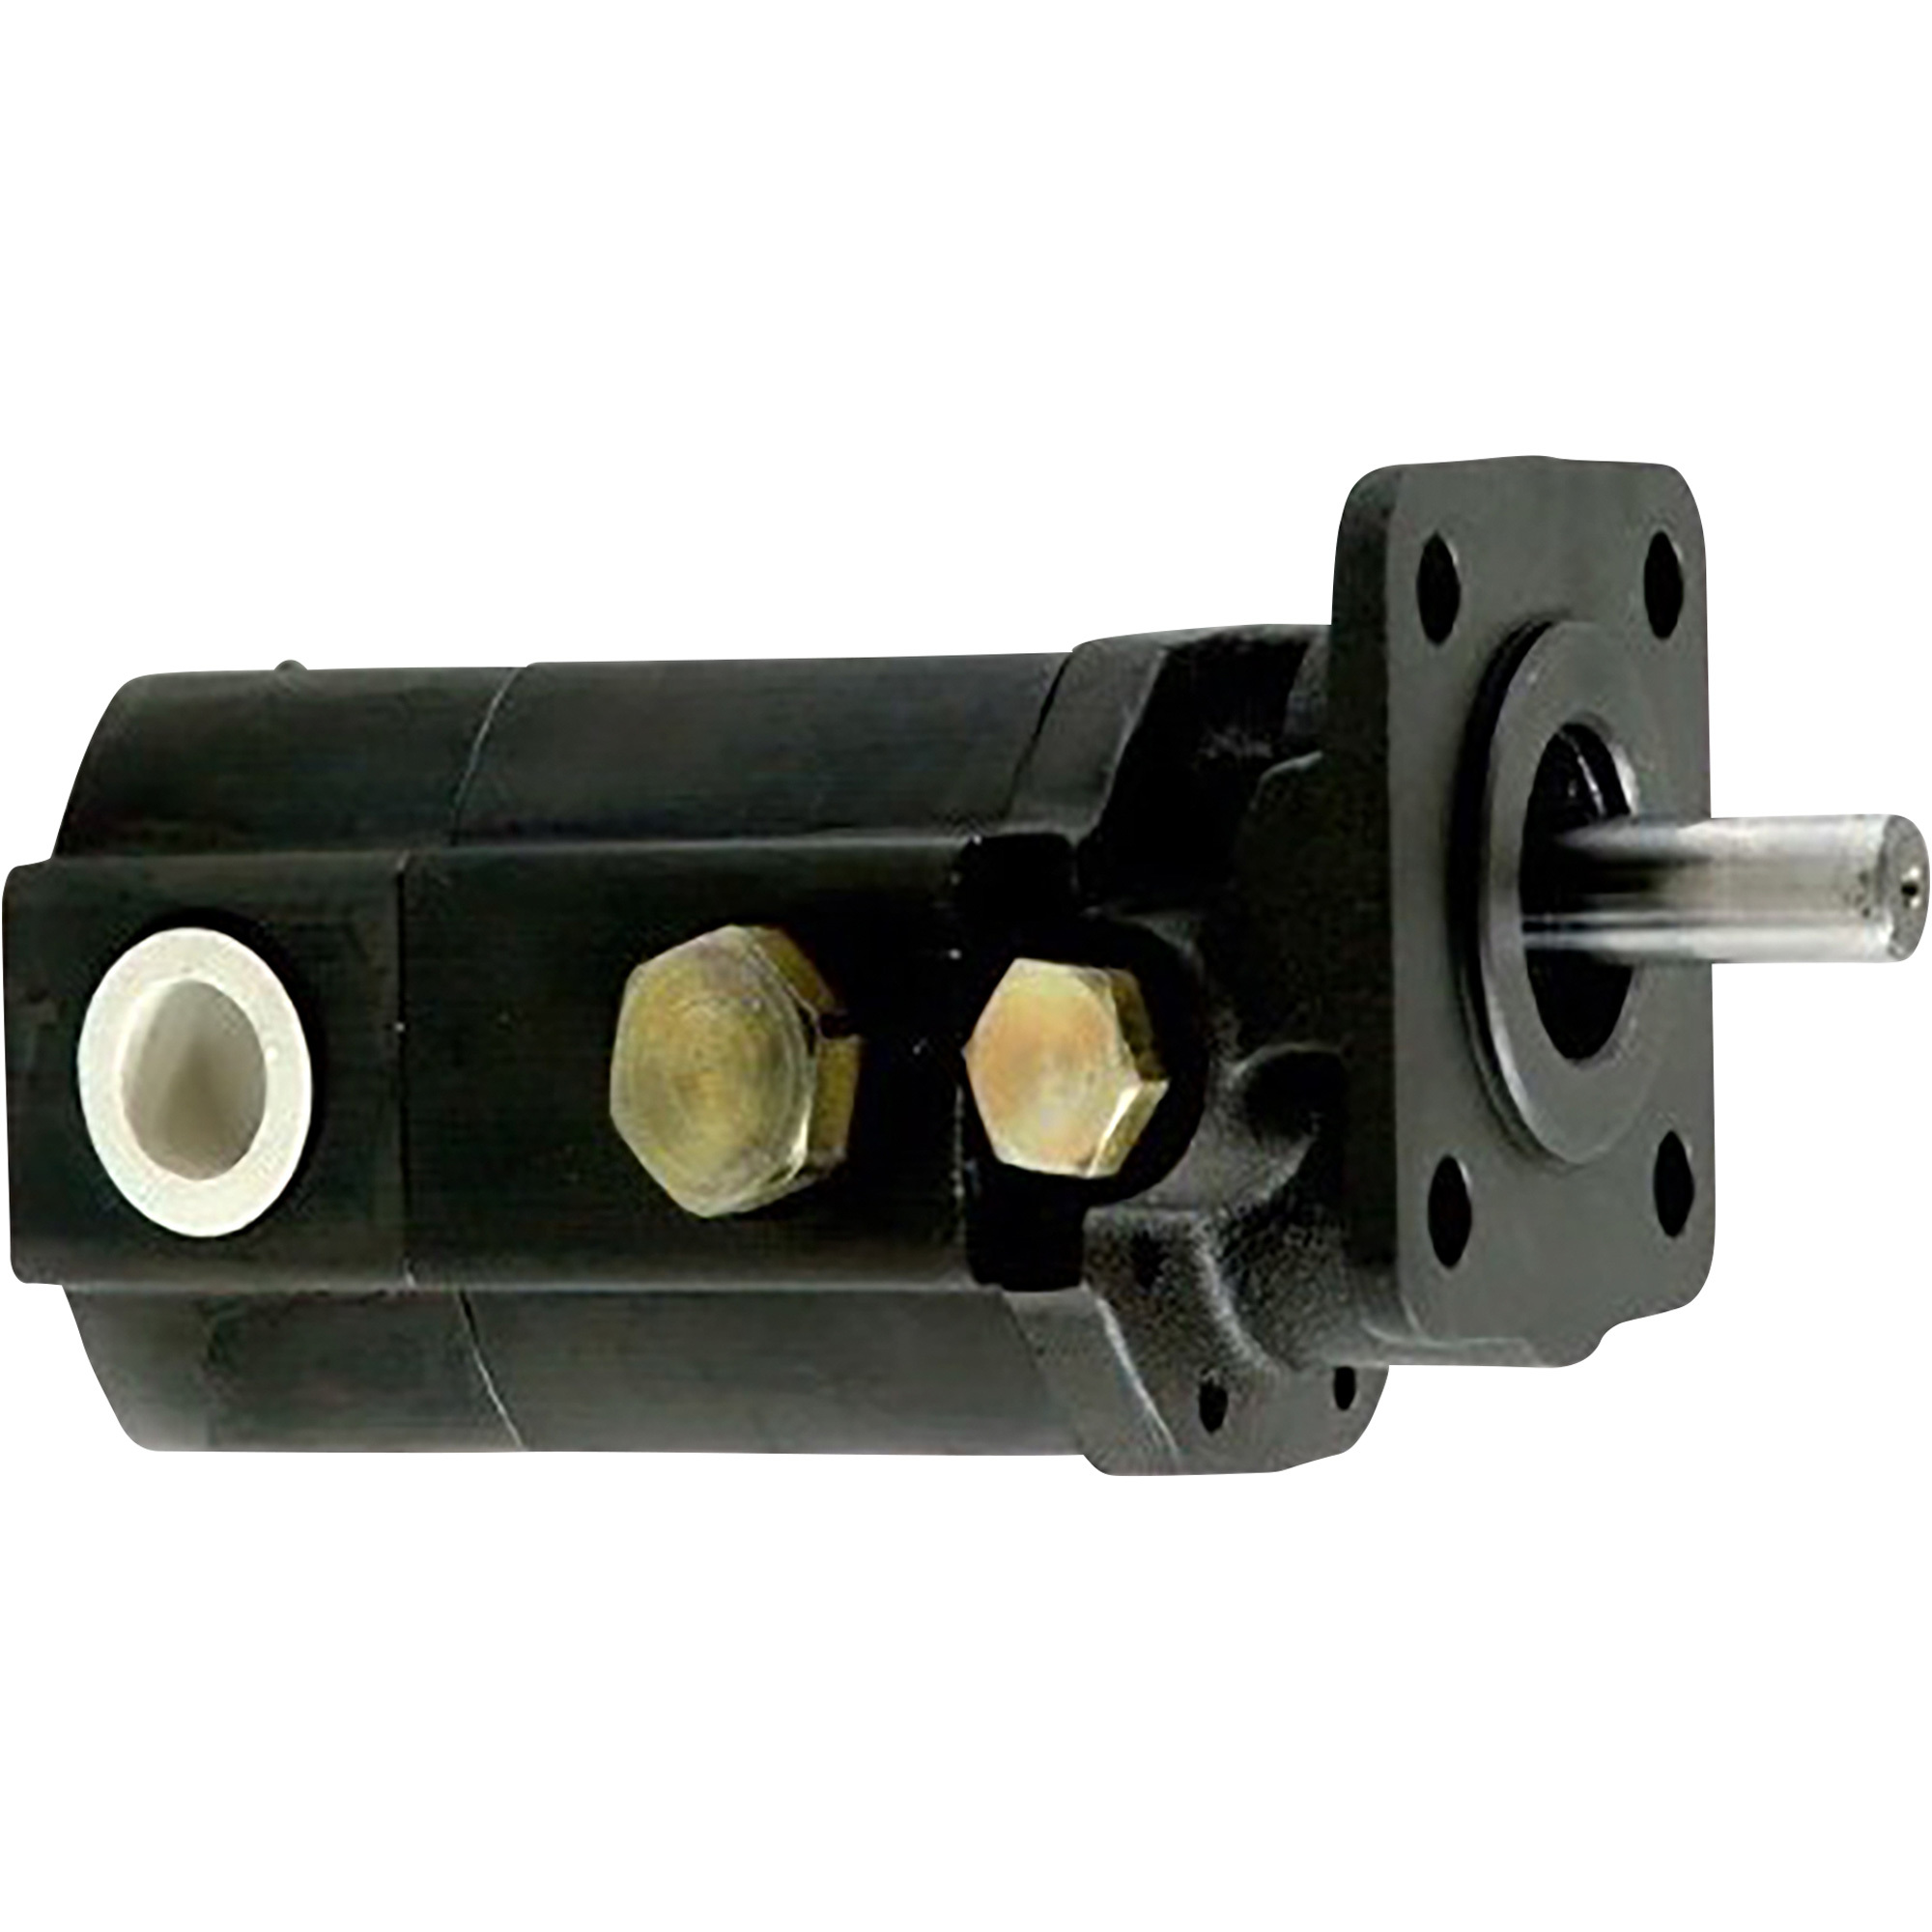 NorTrac Cast Iron Two-Stage Hydraulic Pump, 5 GPM, 1/2Inch Diameter Shaft, Model CBT-4.2/1.6